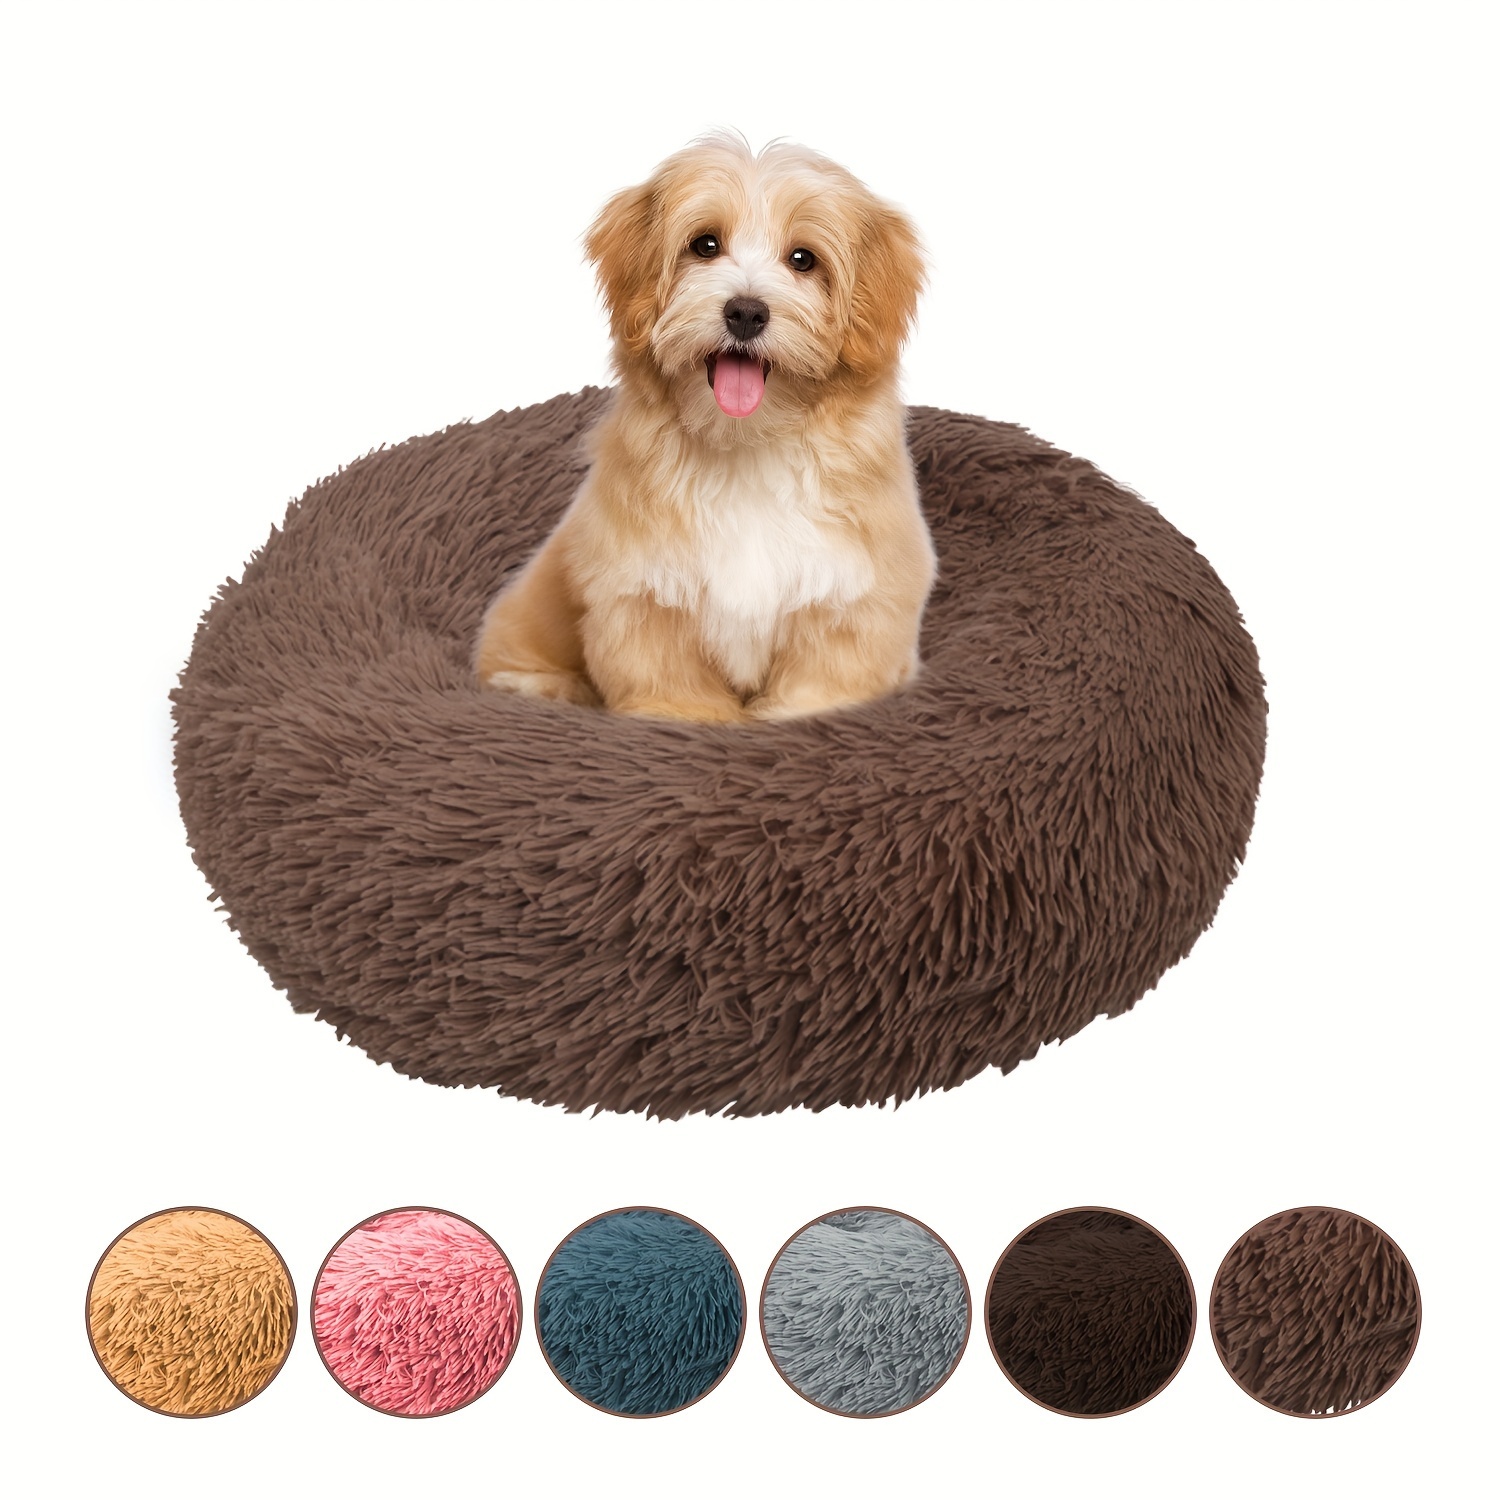 

Calming Dog & Cat Bed, Donut Cuddler Warming Cozy Soft Round Bed, Fluffy Faux Fur Plush Cushion Bed For Small Medium And Large Dogs And Cats (16"/20"/24"/28"/31"/39")